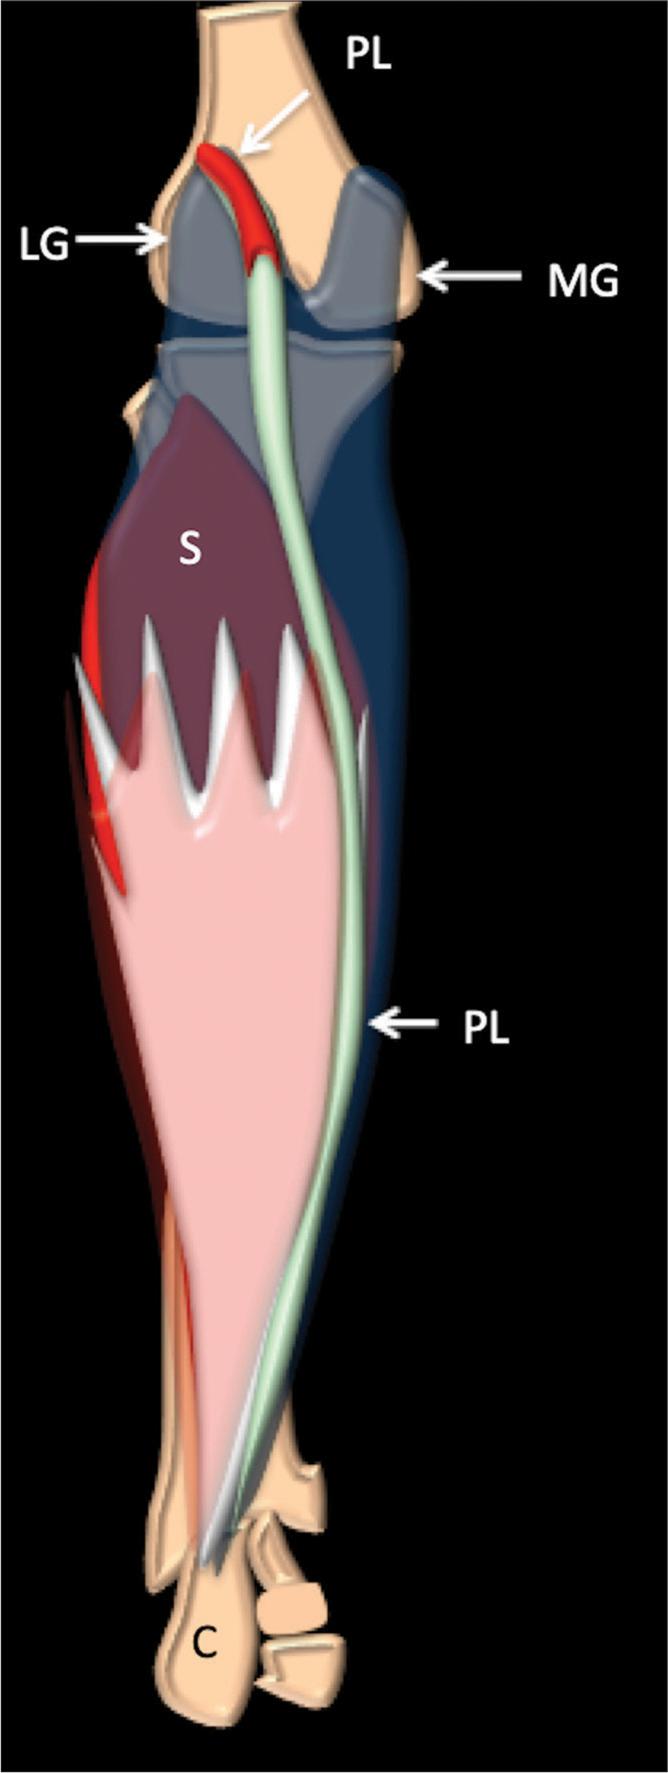 Isolated distal plantaris tendon rupture – An unusual cause of posterior calf pain